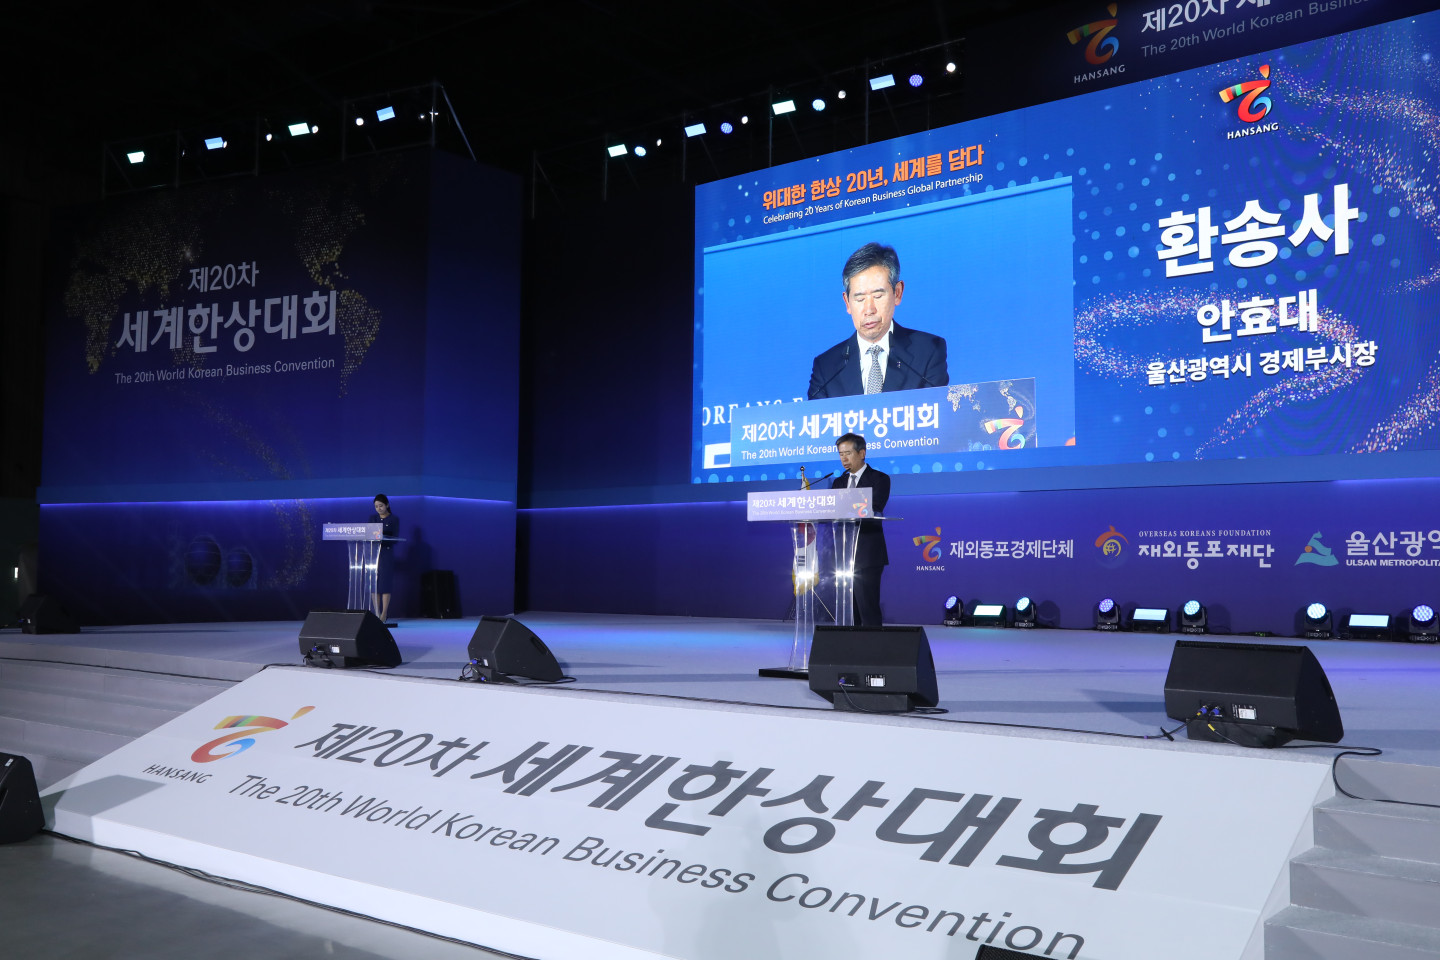 Ulsan Vice Mayor Ahn Hyo-dae, sending his farewell address while announcing the end of the 20th Korean World Business Convention